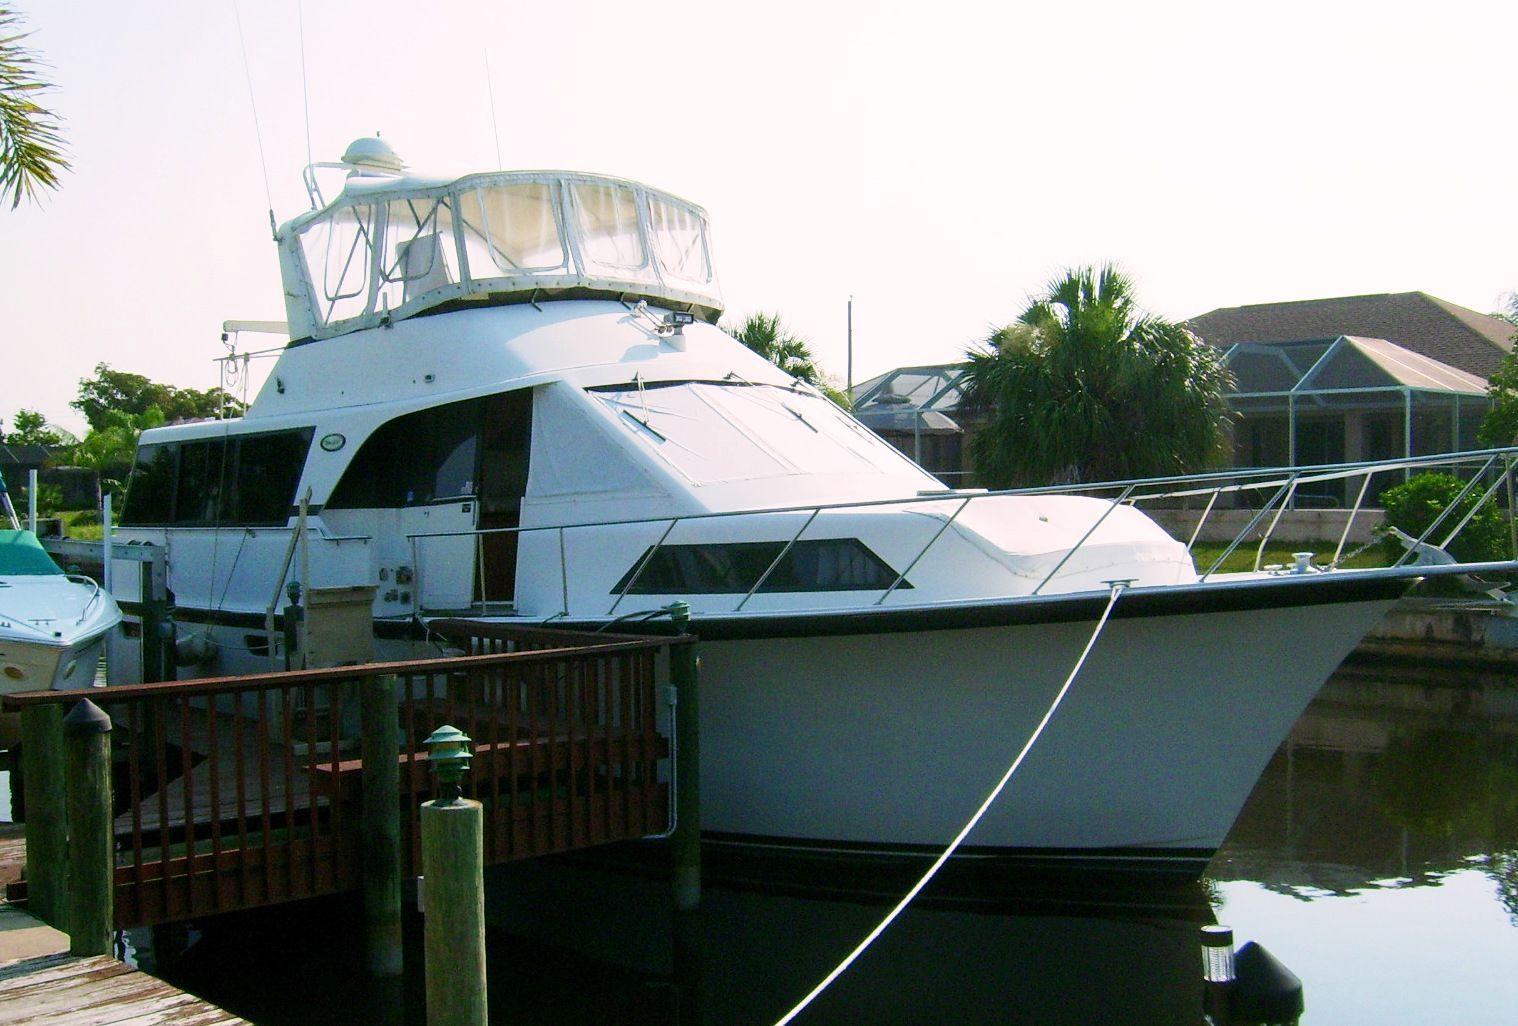 Ocean 48 Aft Cabin Motor Yacht, Cape Coral, Fort Myers, Ft Myers Beach